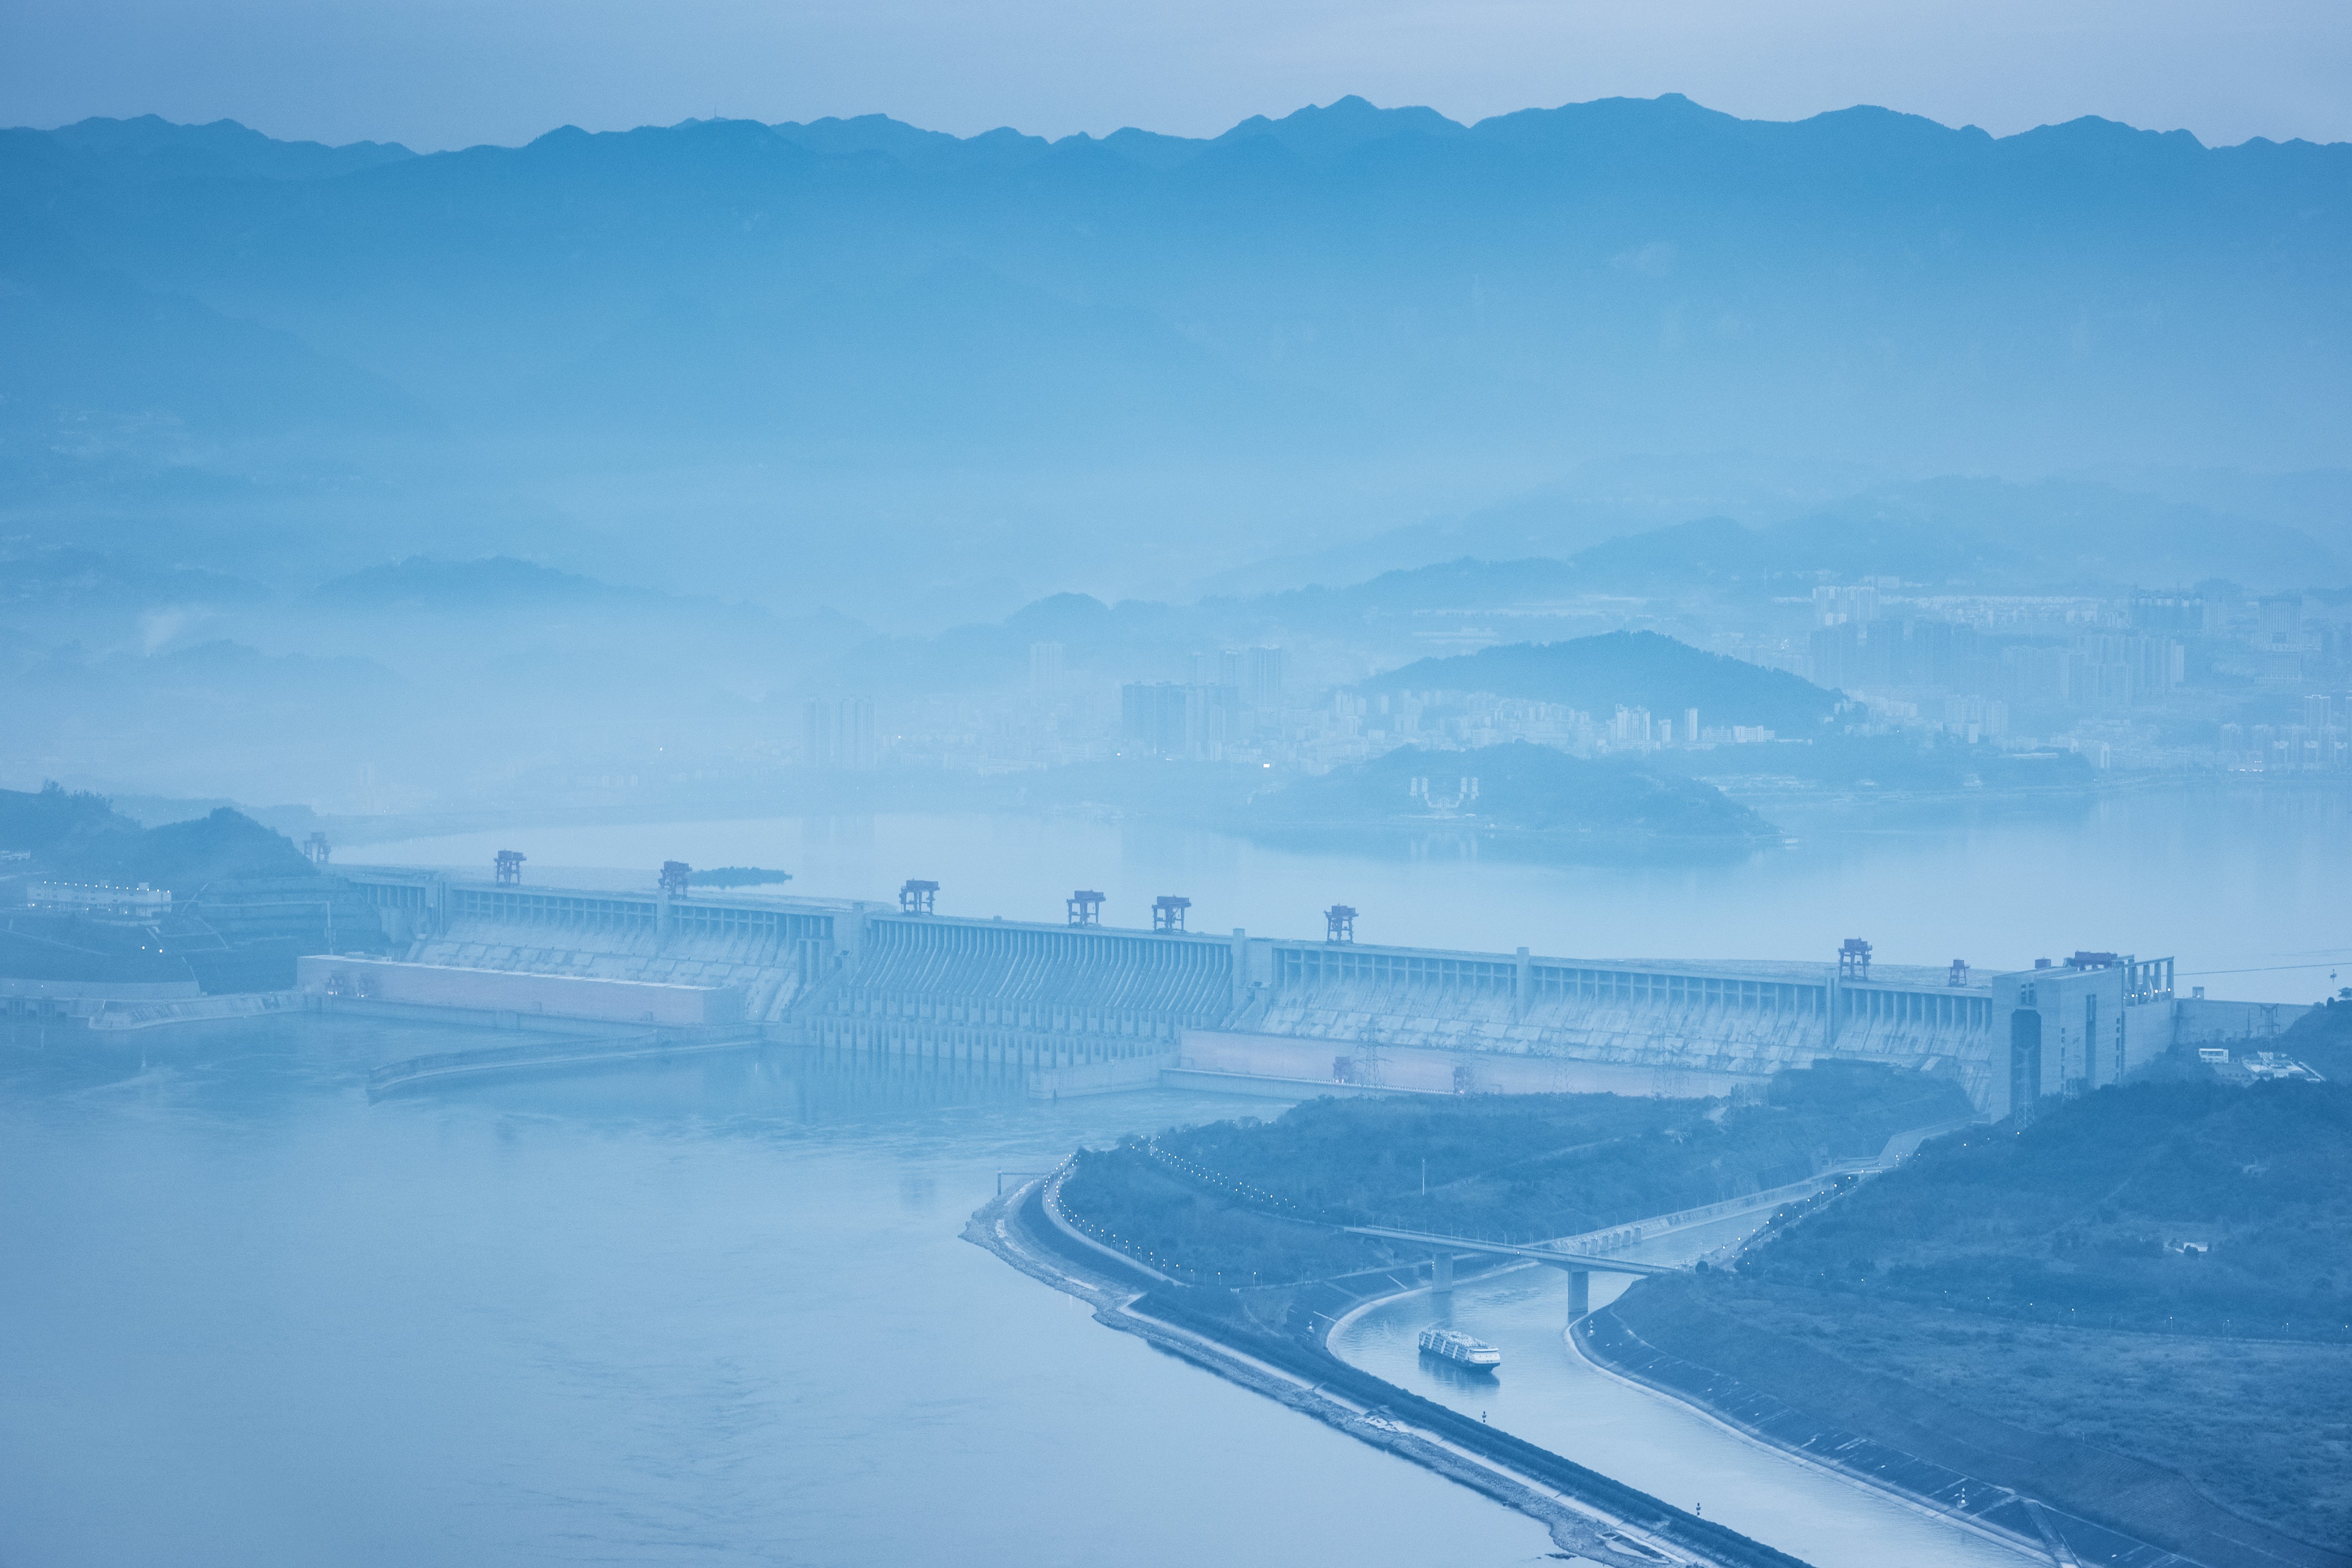 three-gorges-dam-at-dusk-with-blue-tone-WXZX953